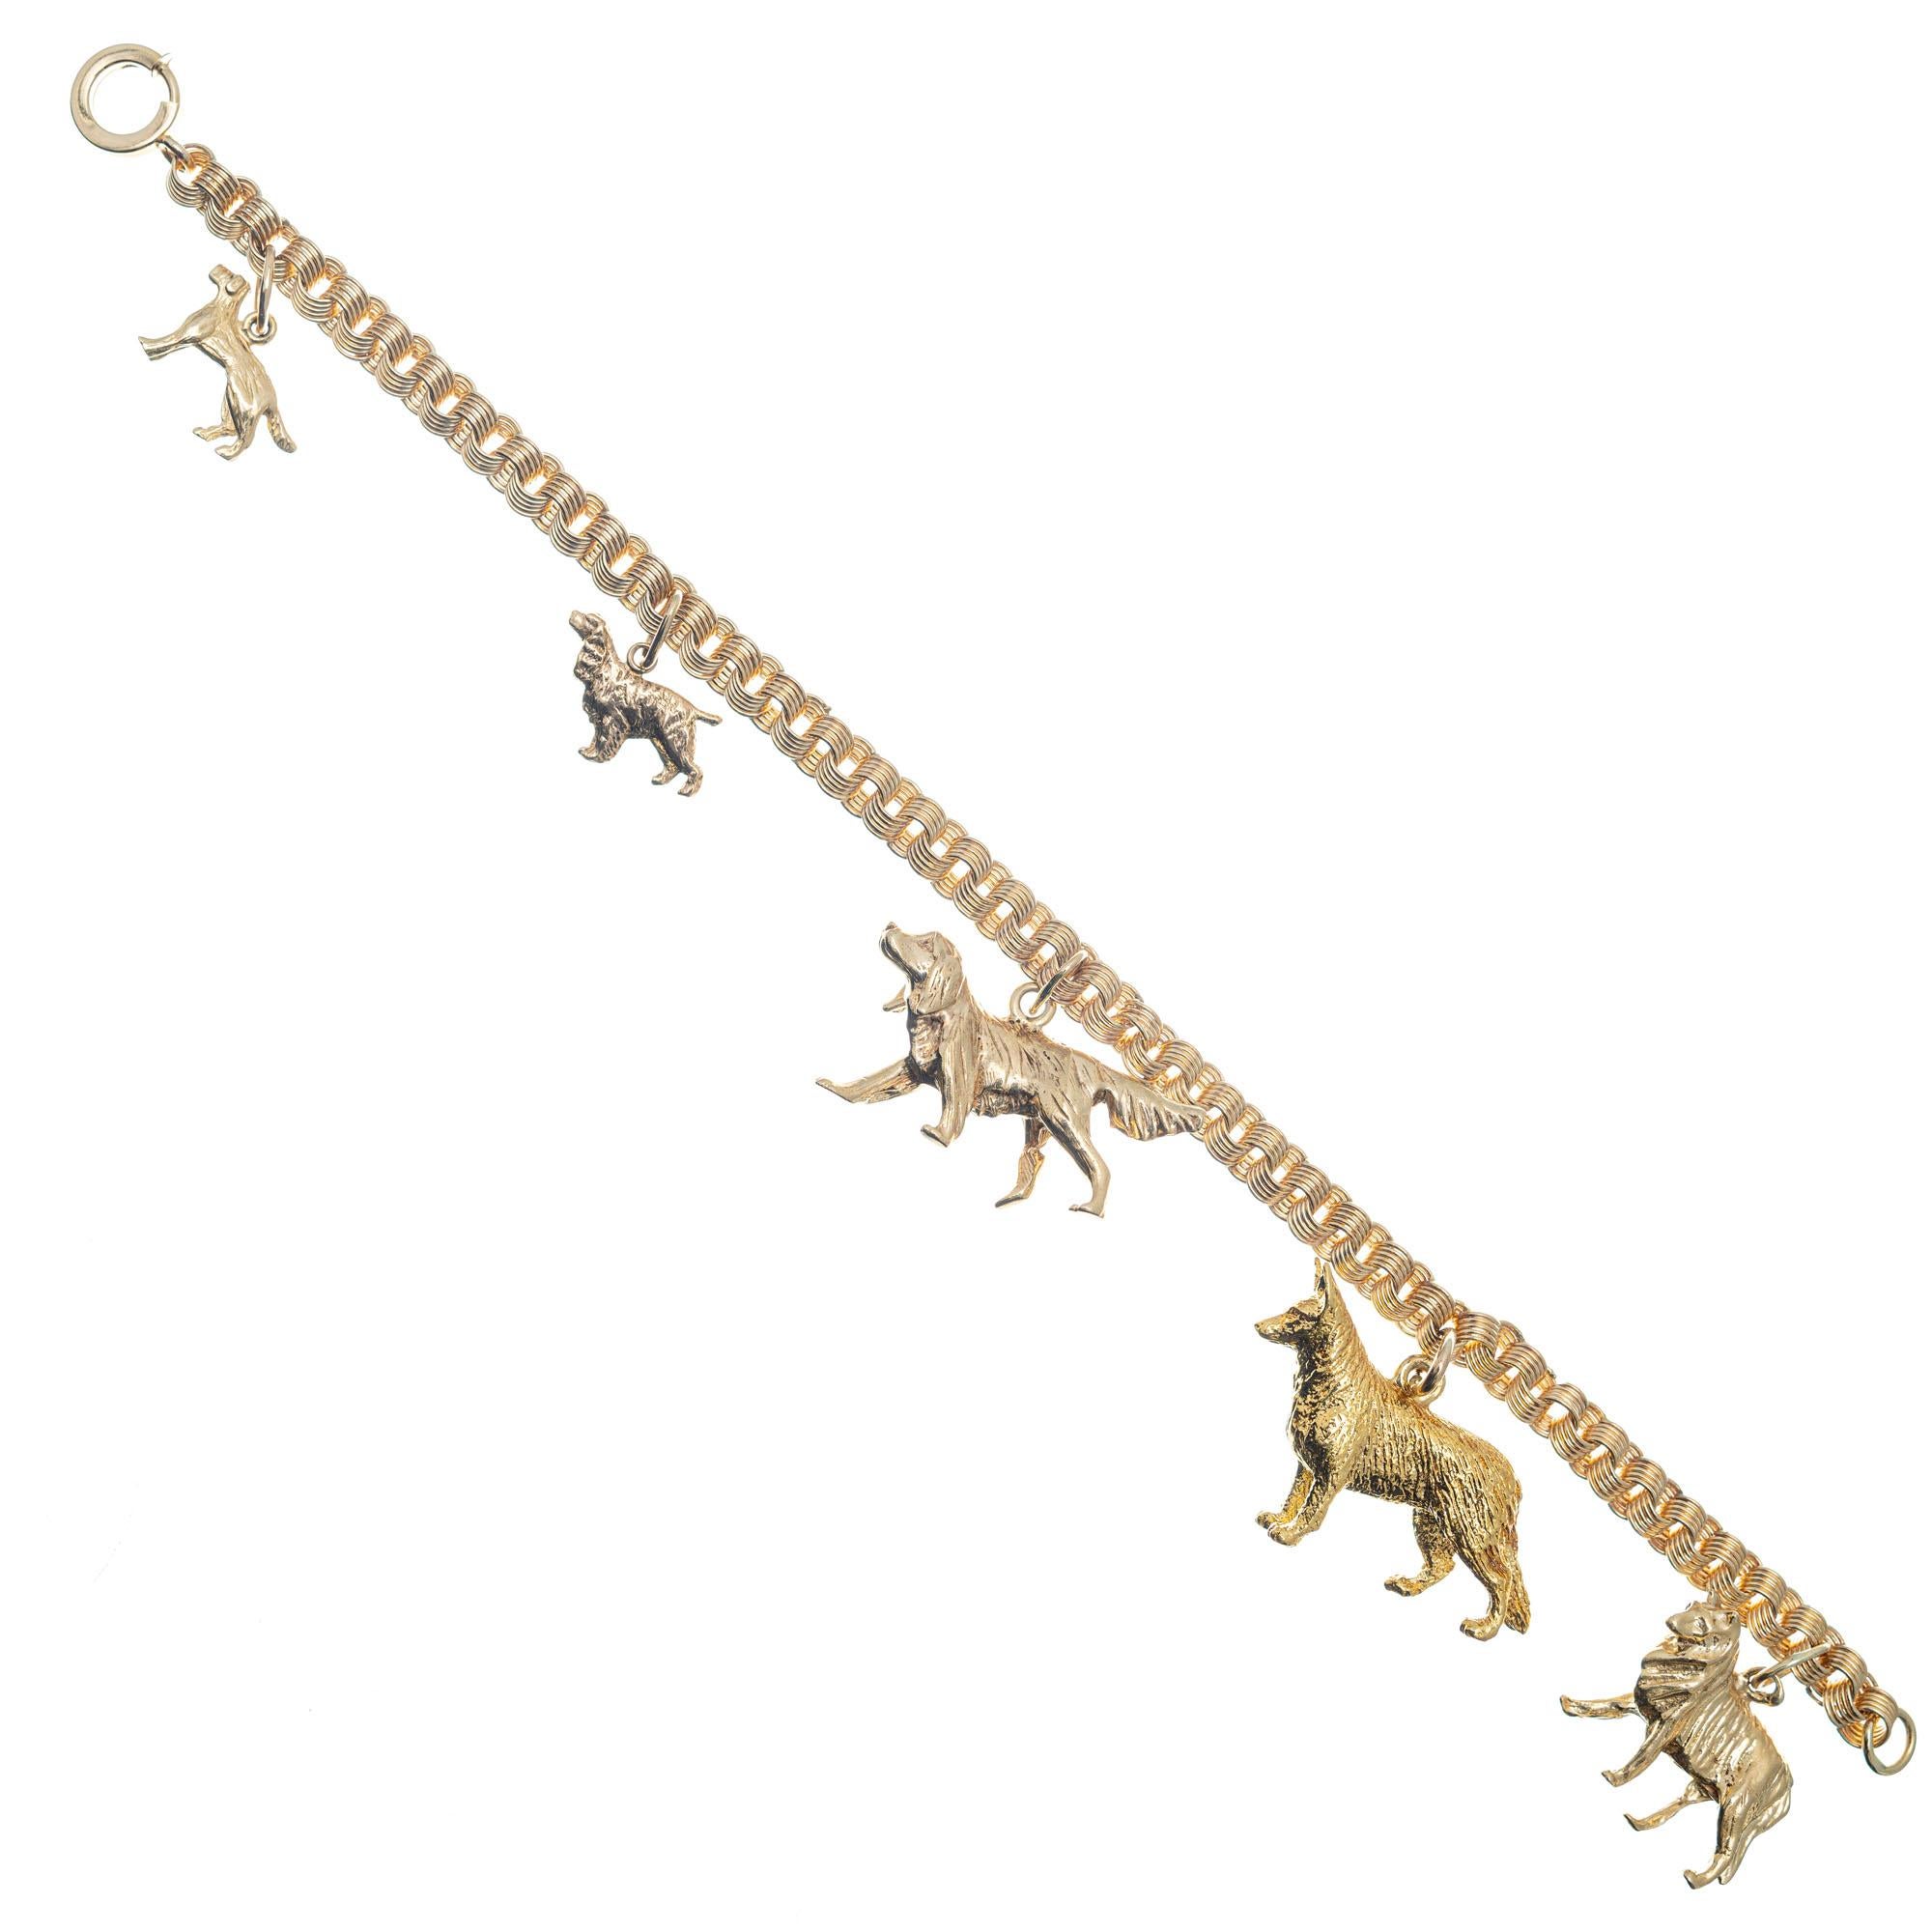 Vintage 1960's handmade triple spiral link 14k yellow gold charm bracelet with five detailed dog charms; retriever, setter, shepherd, collie. 7.5 inches in length. 

14k yellow gold 
Stamped: 14k
34 grams
Total length: 7.5 Inches